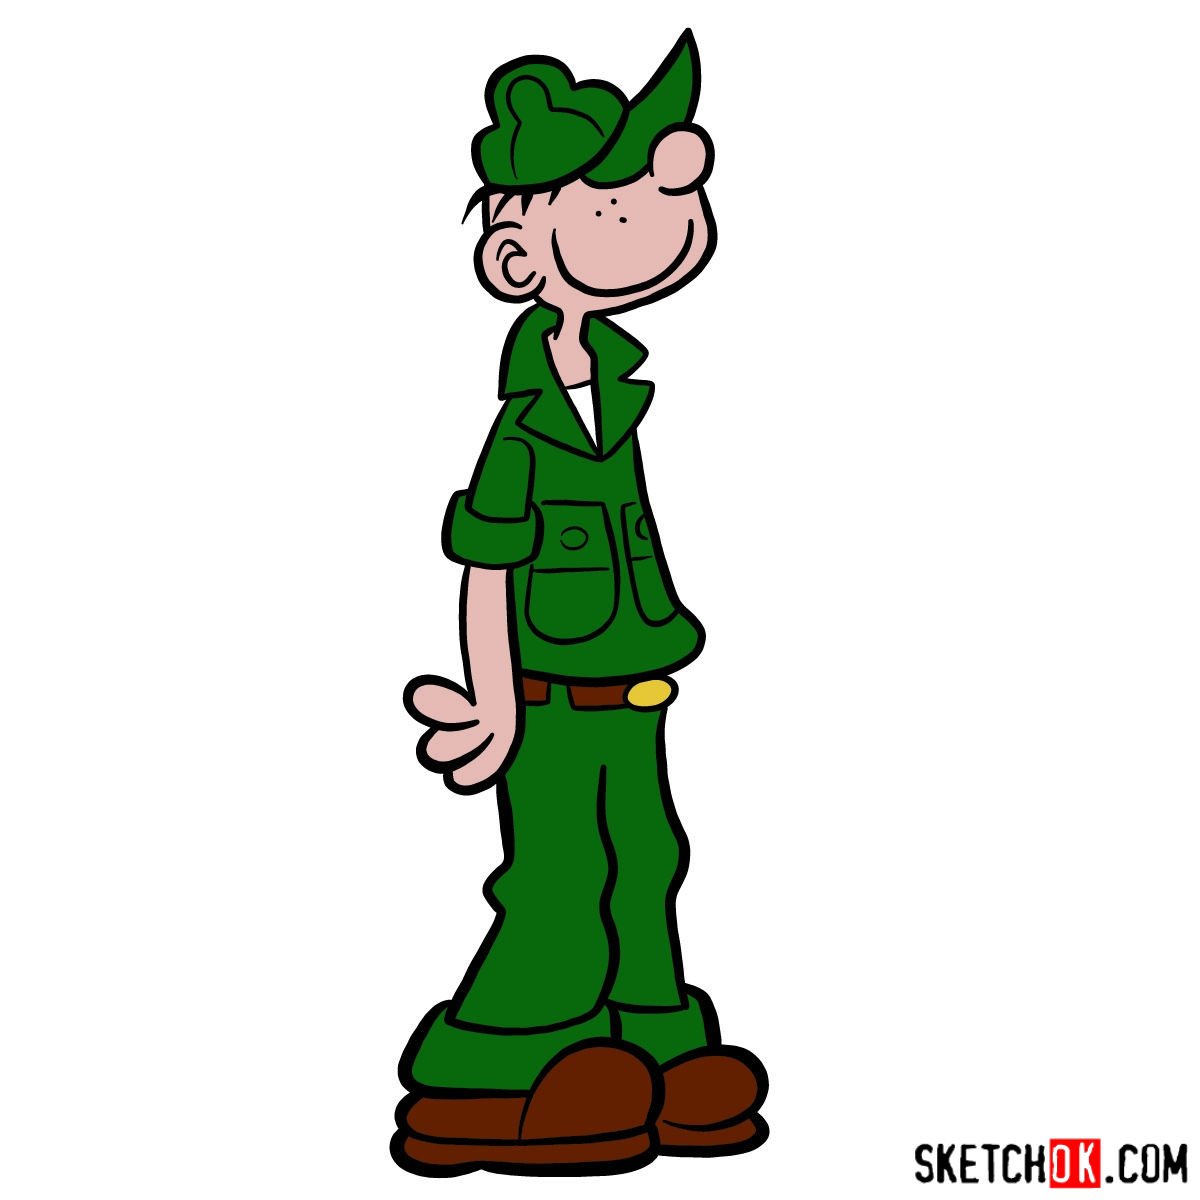 How to draw Beetle Bailey - Sketchok easy drawing guides